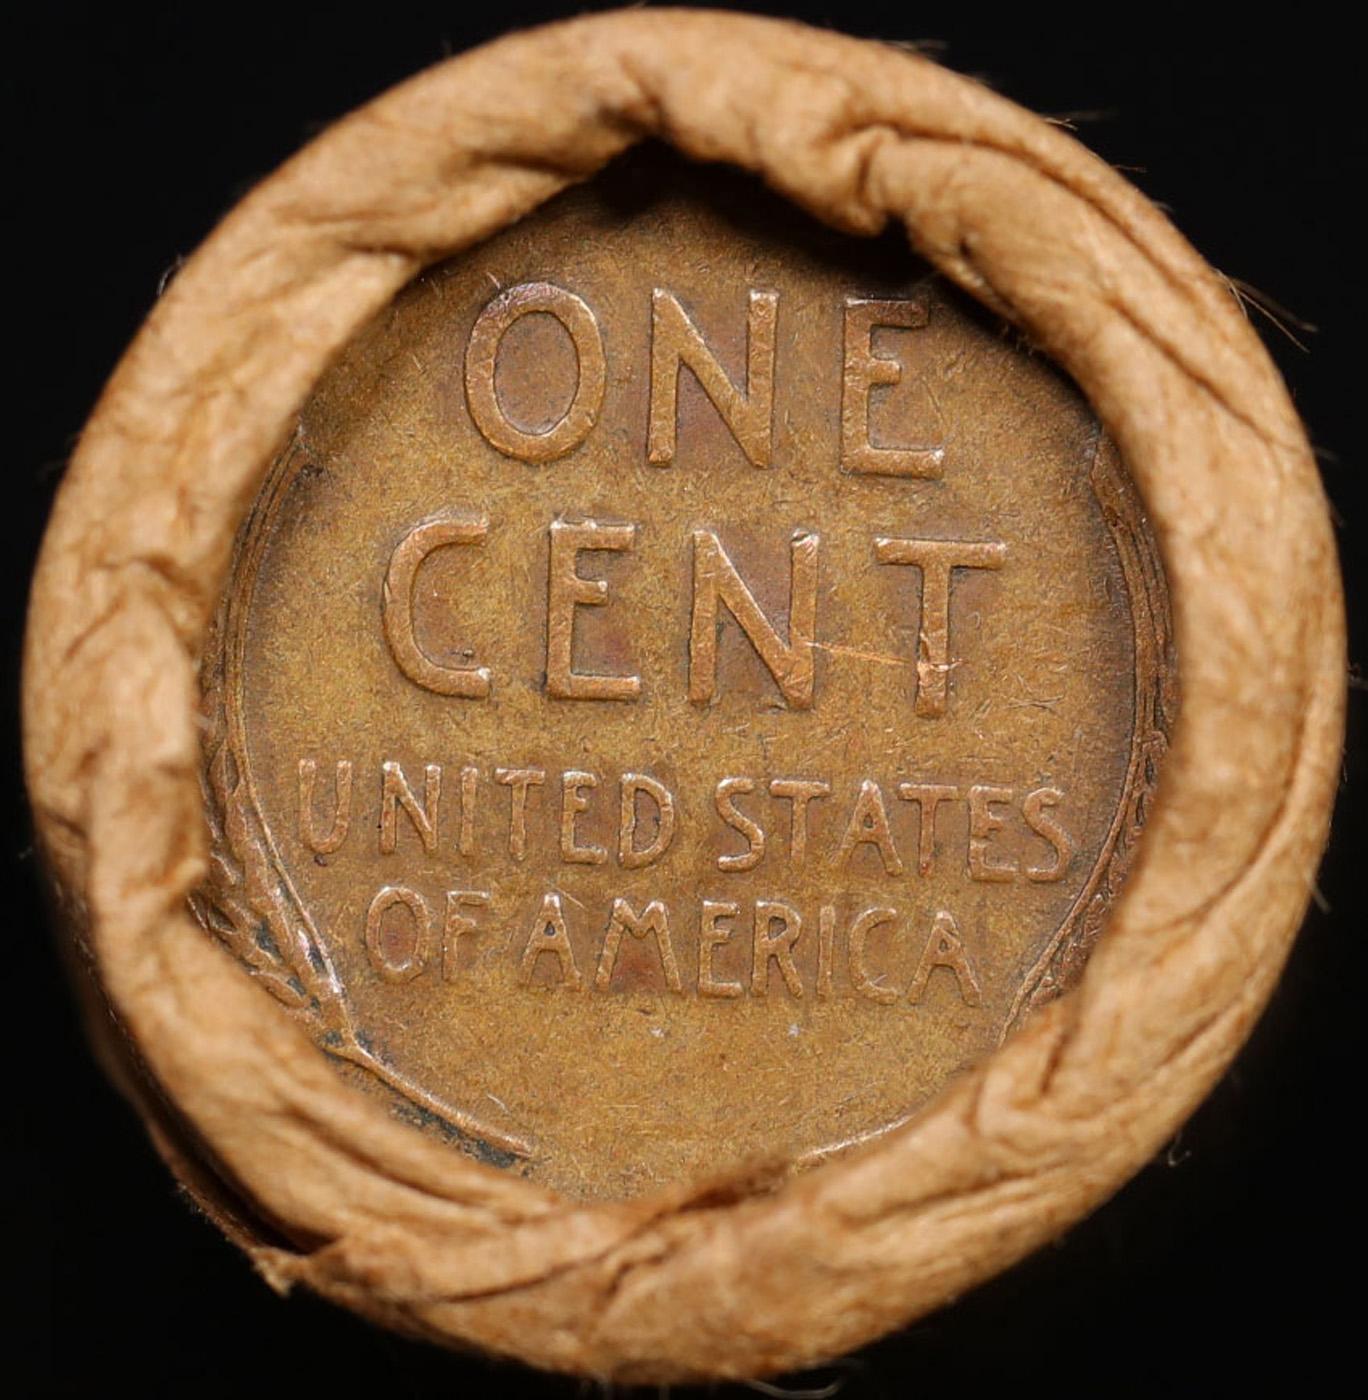 Mixed small cents 1c orig shotgun roll, 1919-s Lincoln Cent,wheat Cent other end, McDonalds Brandt W